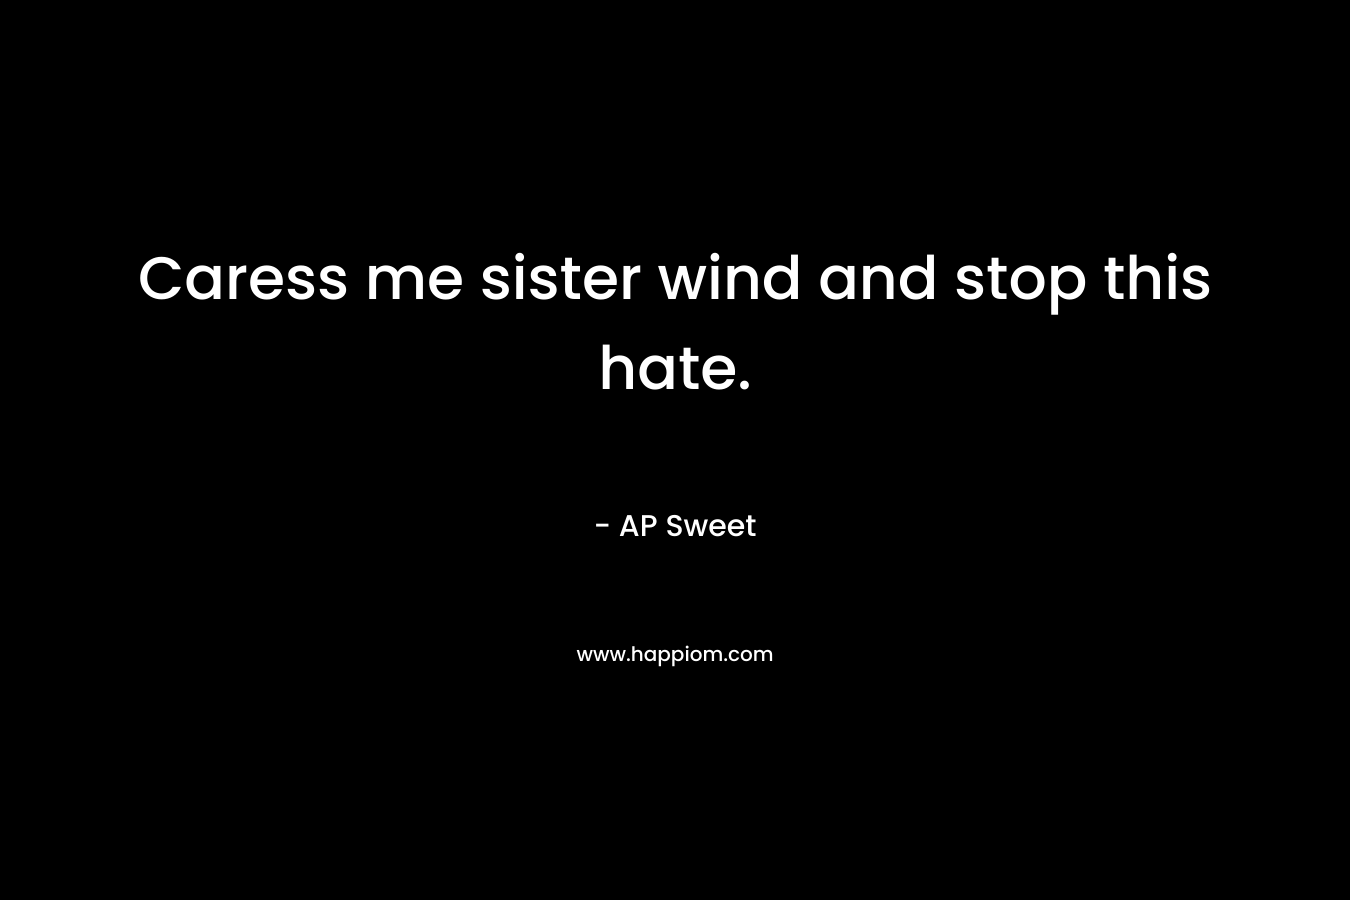 Caress me sister wind and stop this hate. – AP Sweet